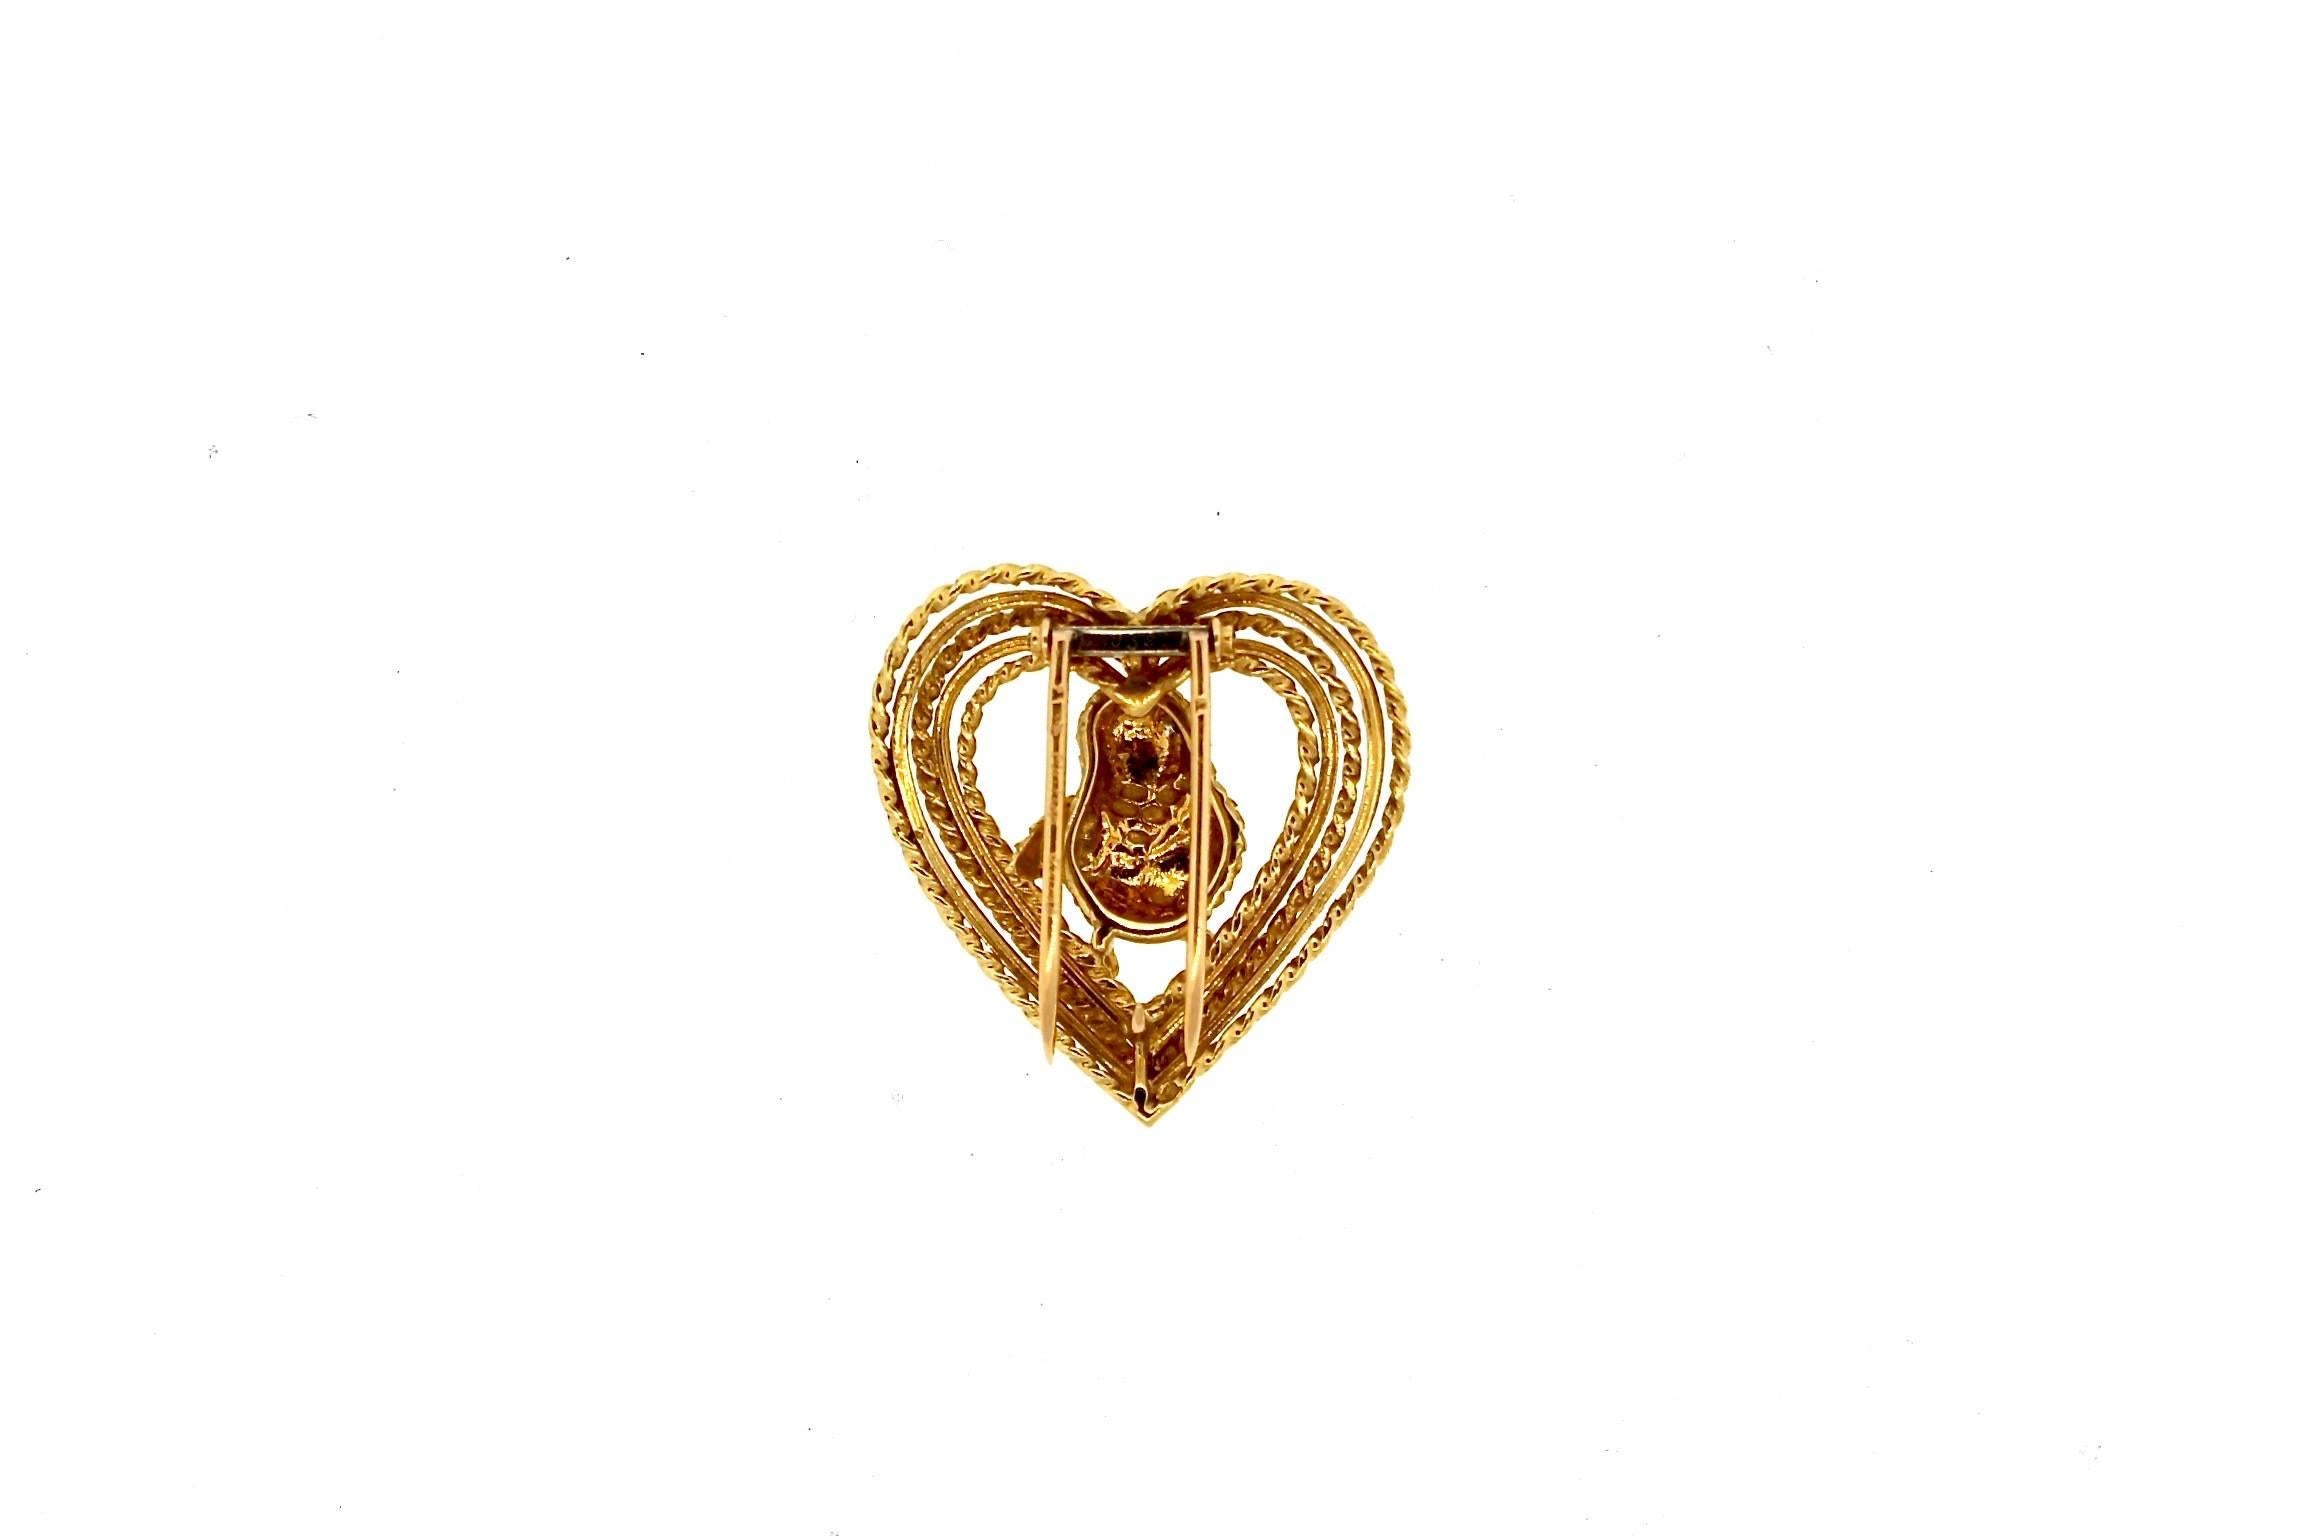 Whimsical and collectible 18k yellow gold lover bird pin in heart by Cartier circa 1960. Cartier is known for making romantic and whimsical jewels throughout the century.  This lovebird perched in a heart is a classic symbol of love. Cartier made a